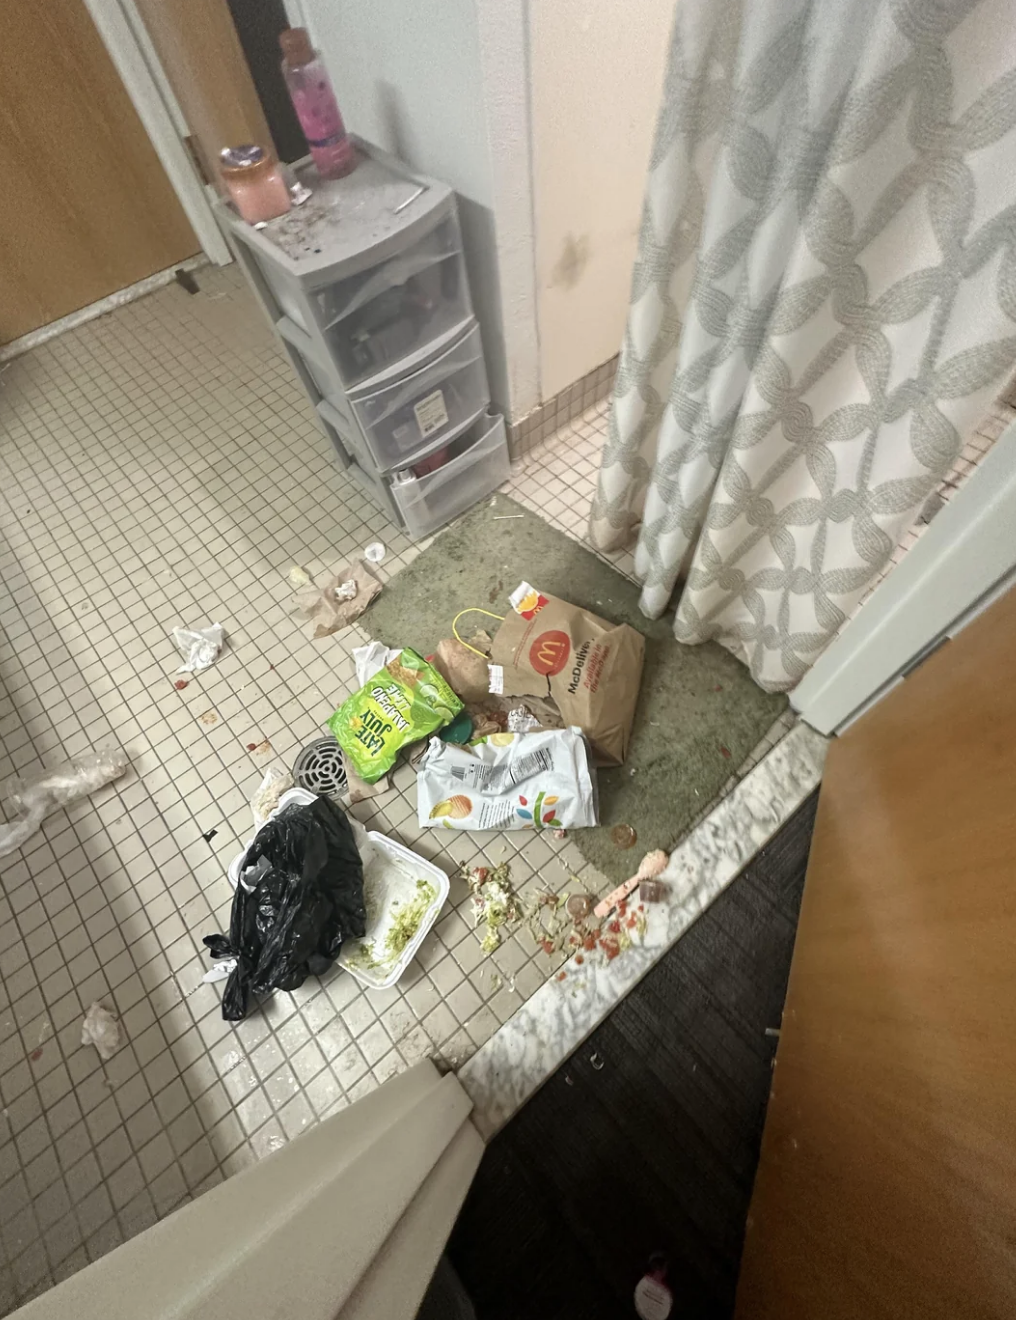 A cluttered bathroom floor with various personal items and trash strewn around